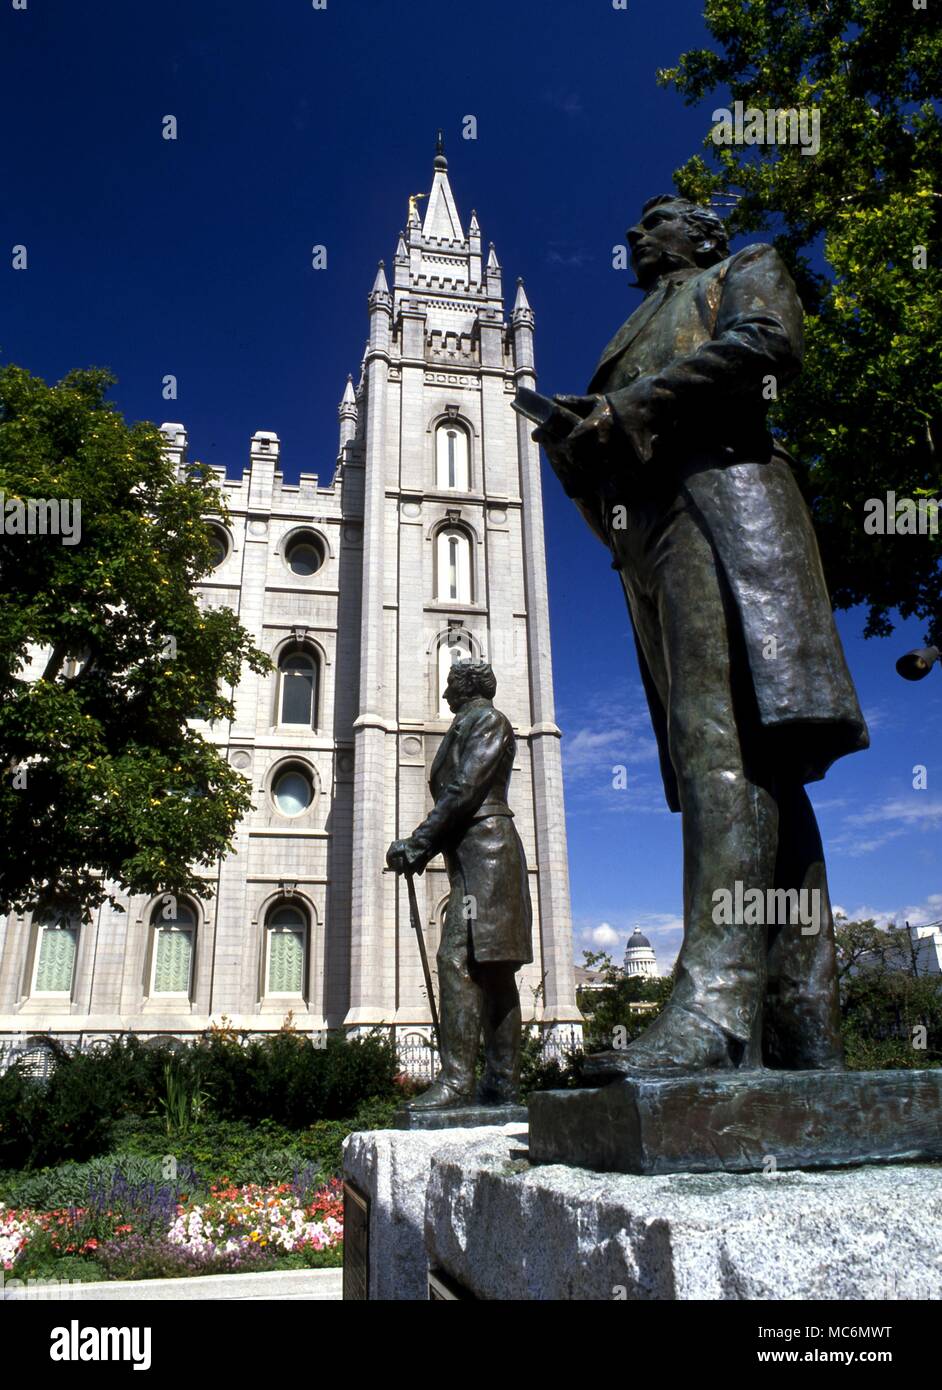 Mormons - Joseph Smith. The prophet Smith, born 23rd December 1805, murdered 27th June 1844. Statue in grounds of Temple, Salt Lake City. Stock Photo